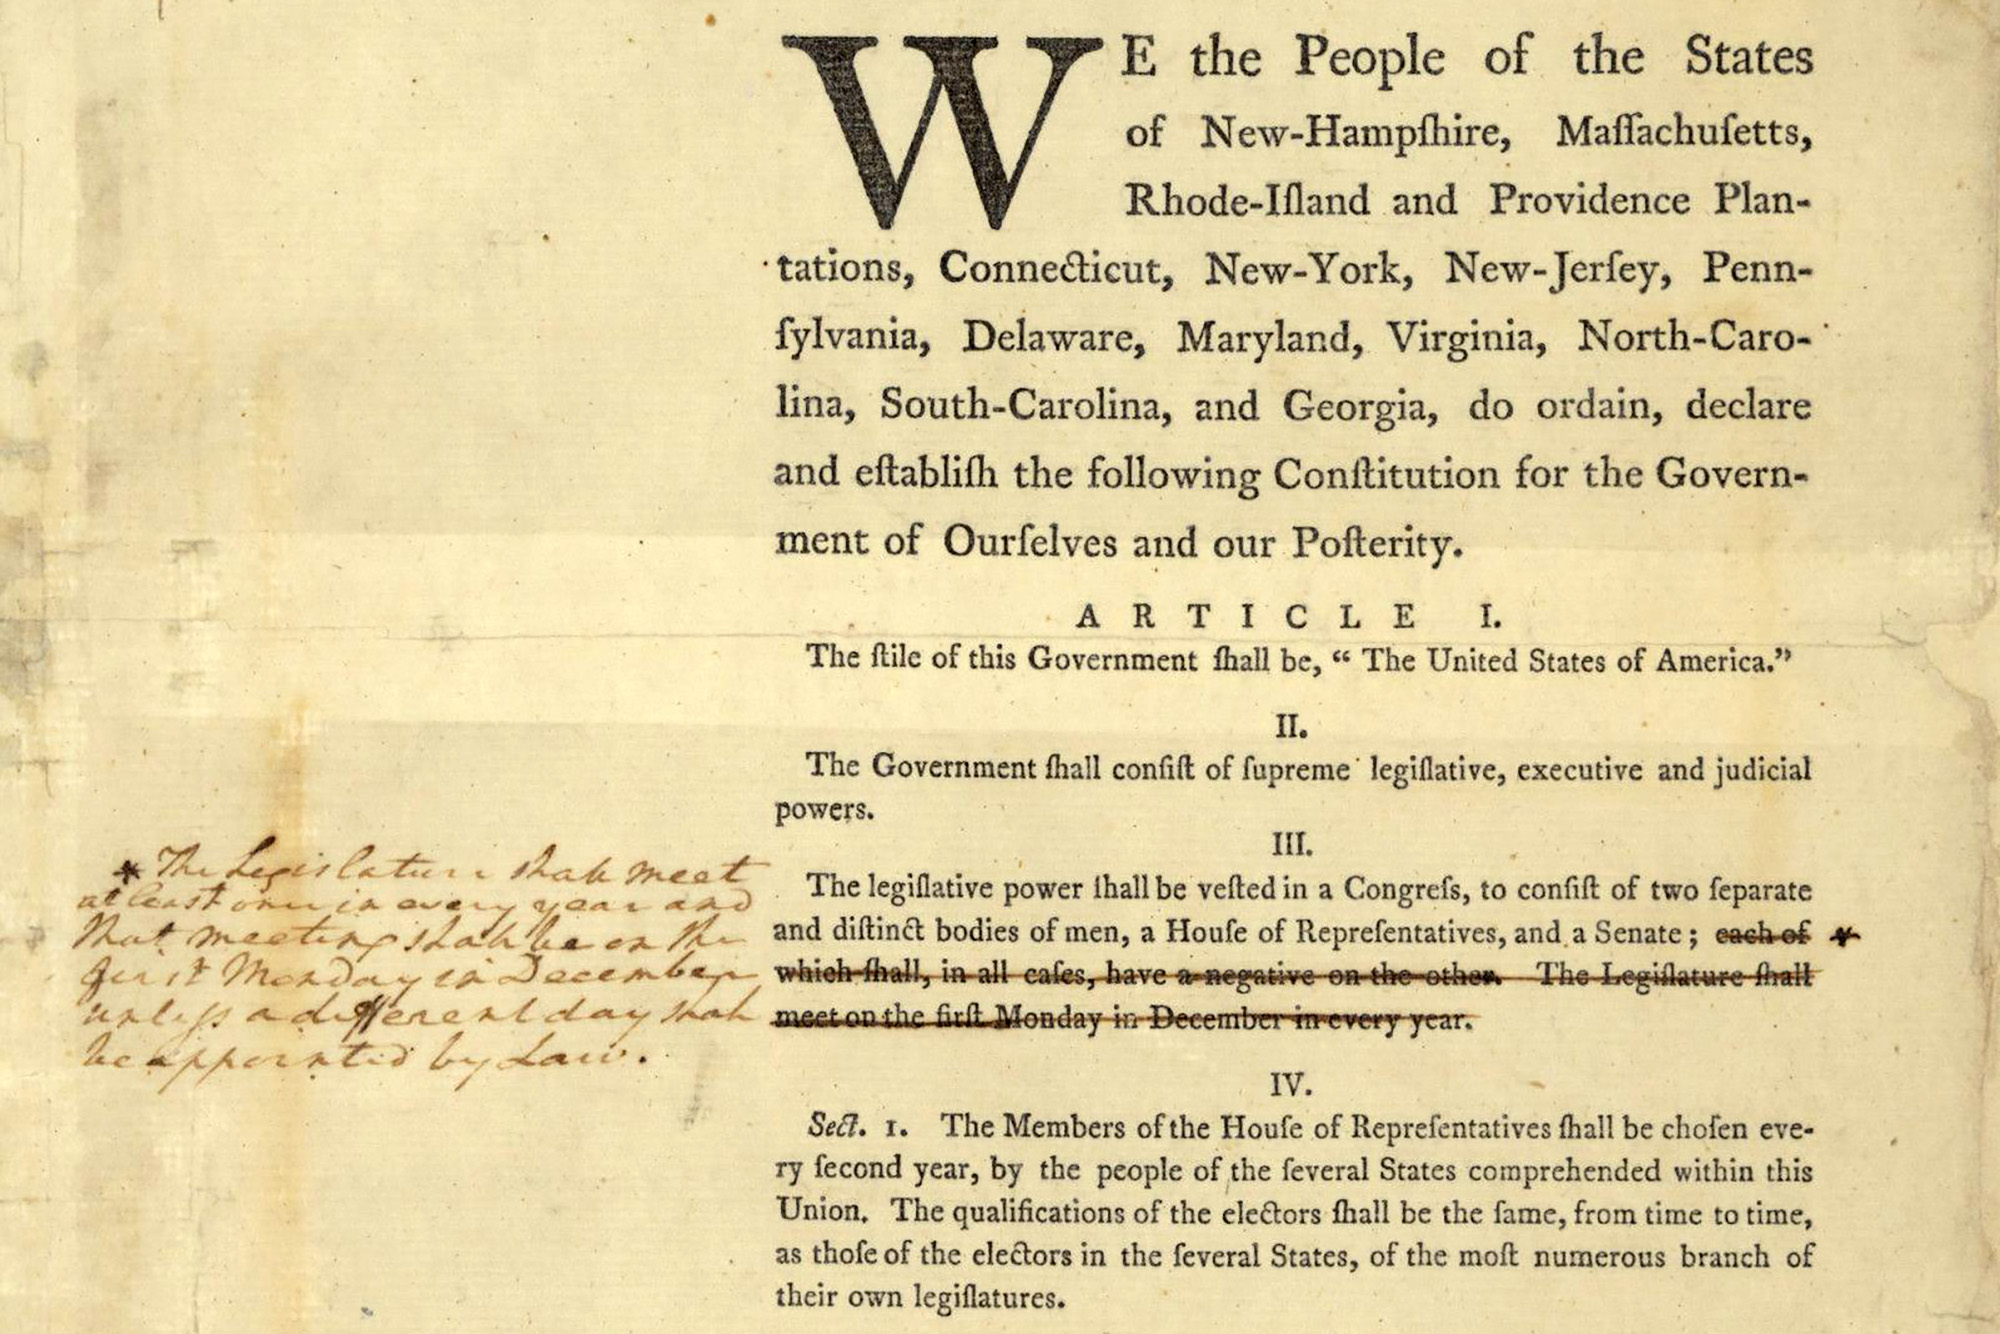 Washington's Annotated Copy of a Draft of the U.S. Constitution